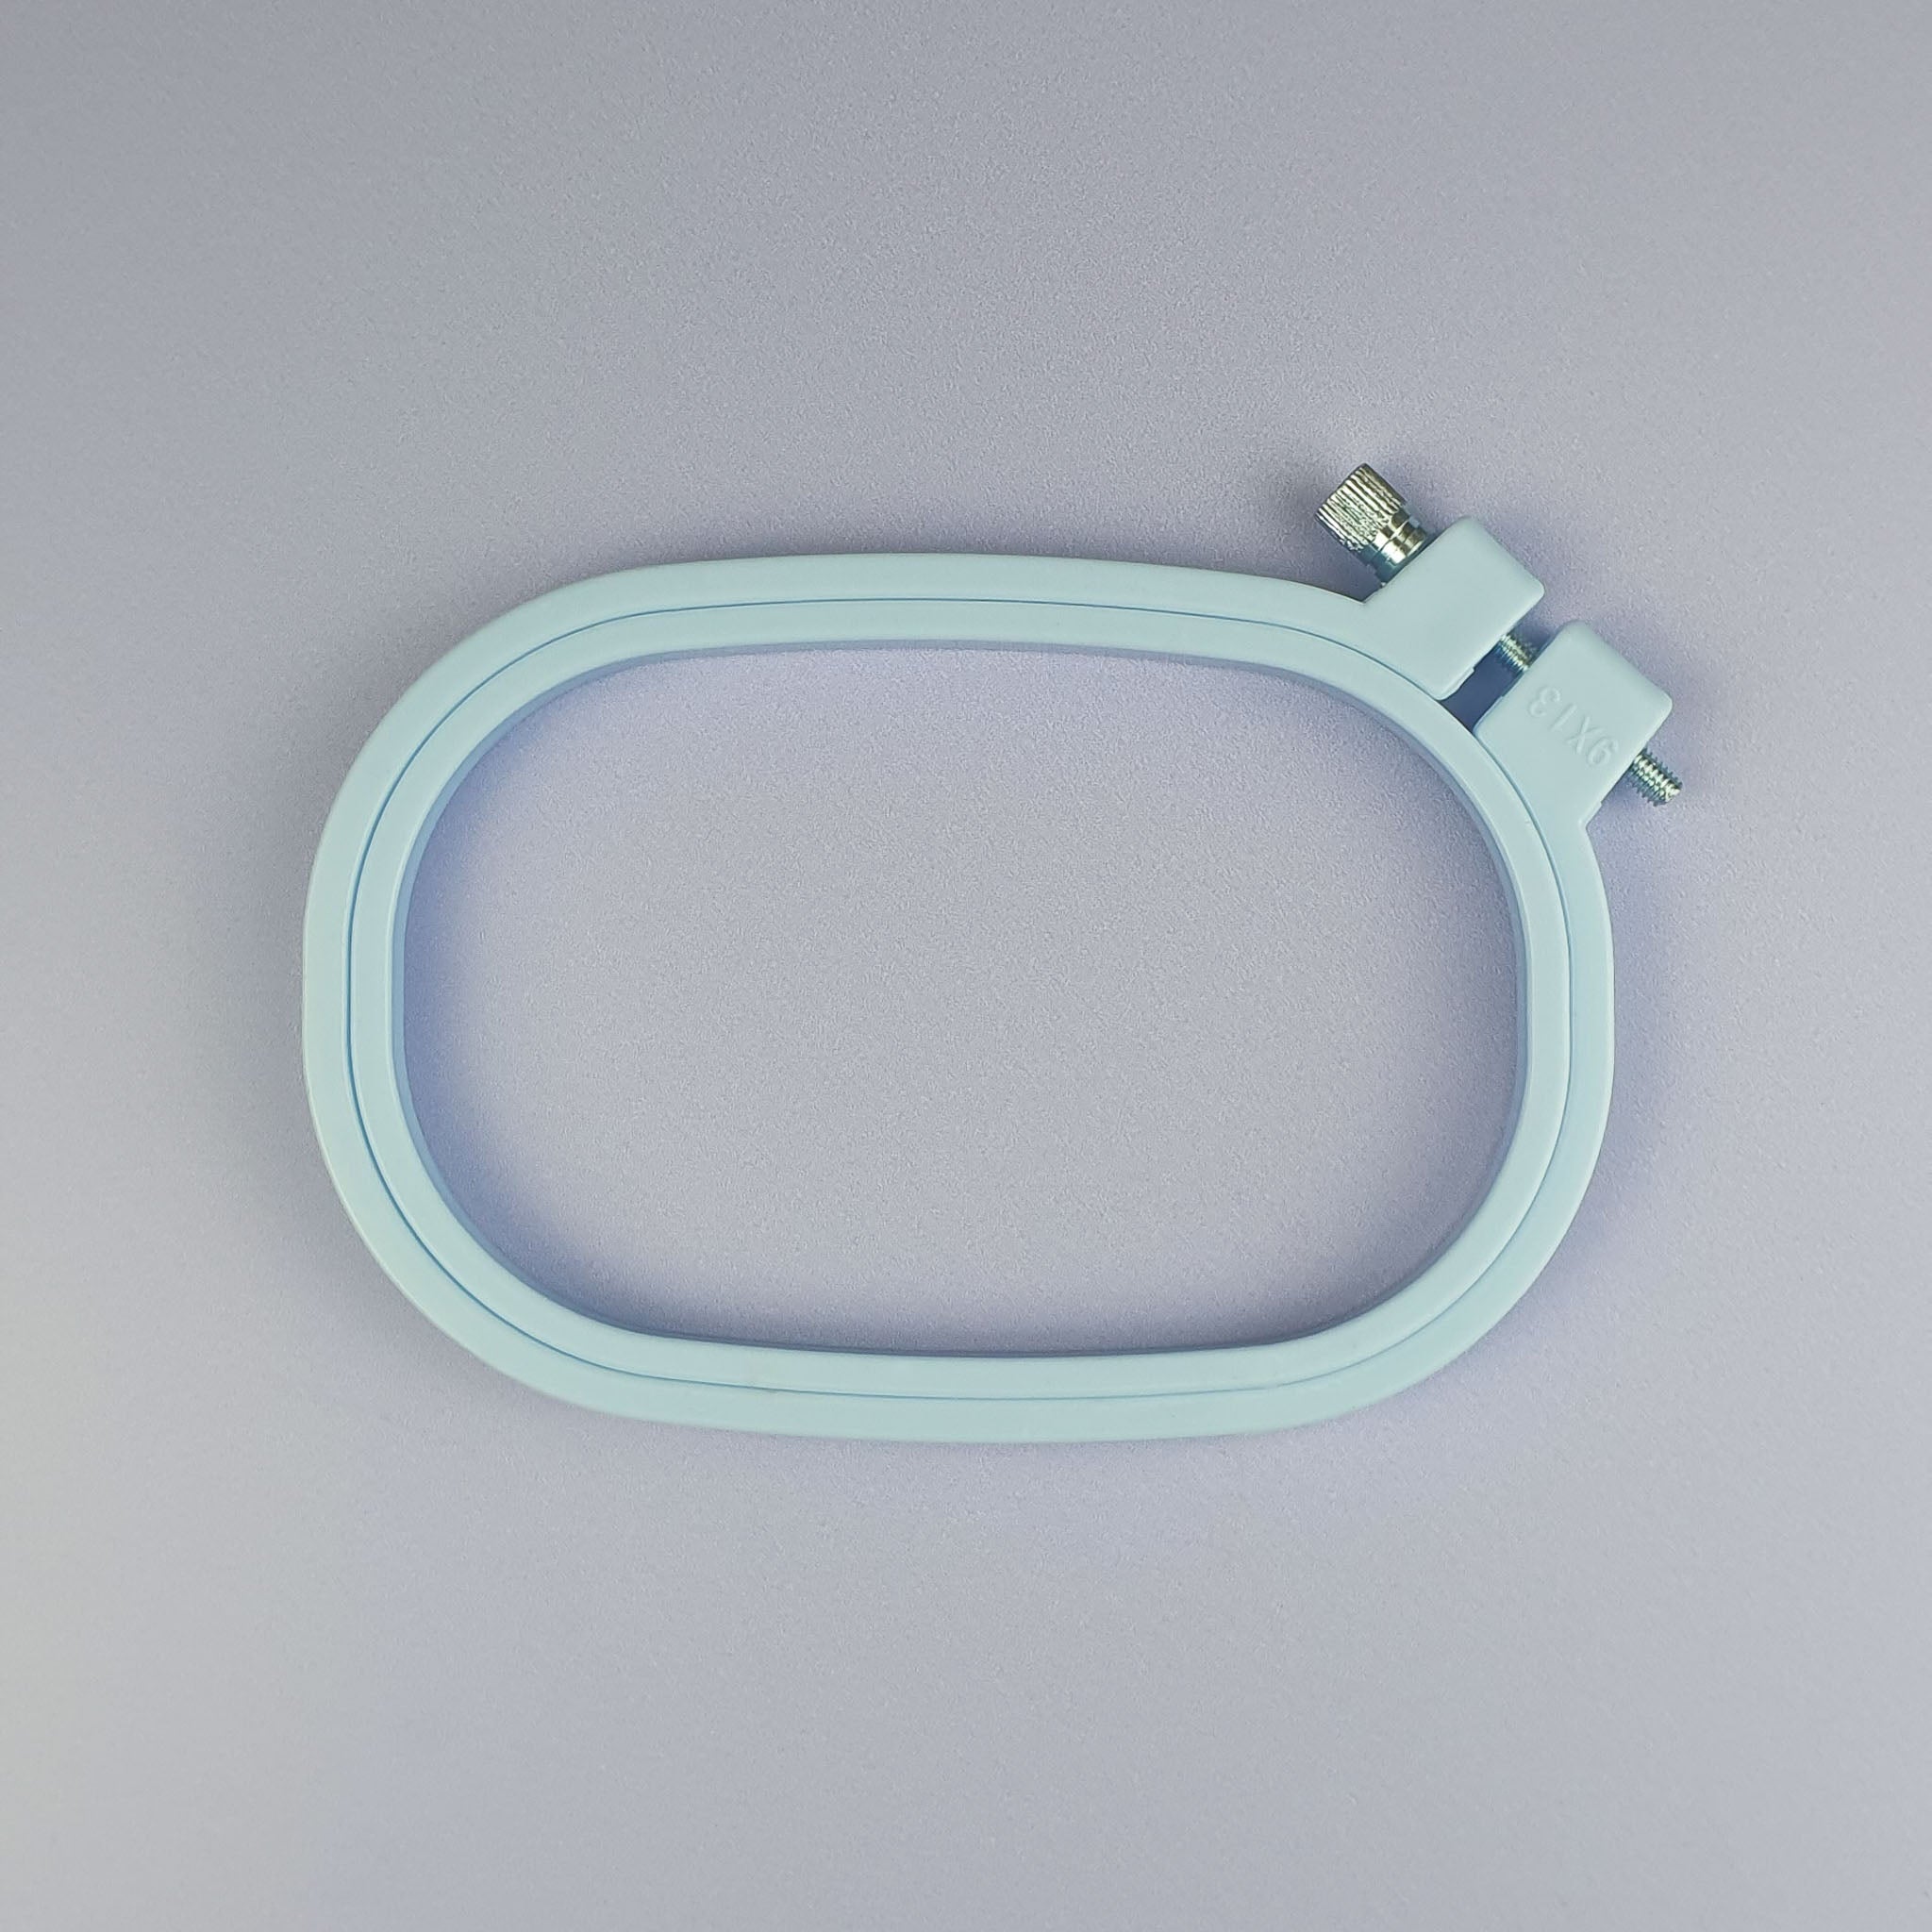 Oval Embroidery Hoop Baby Blue